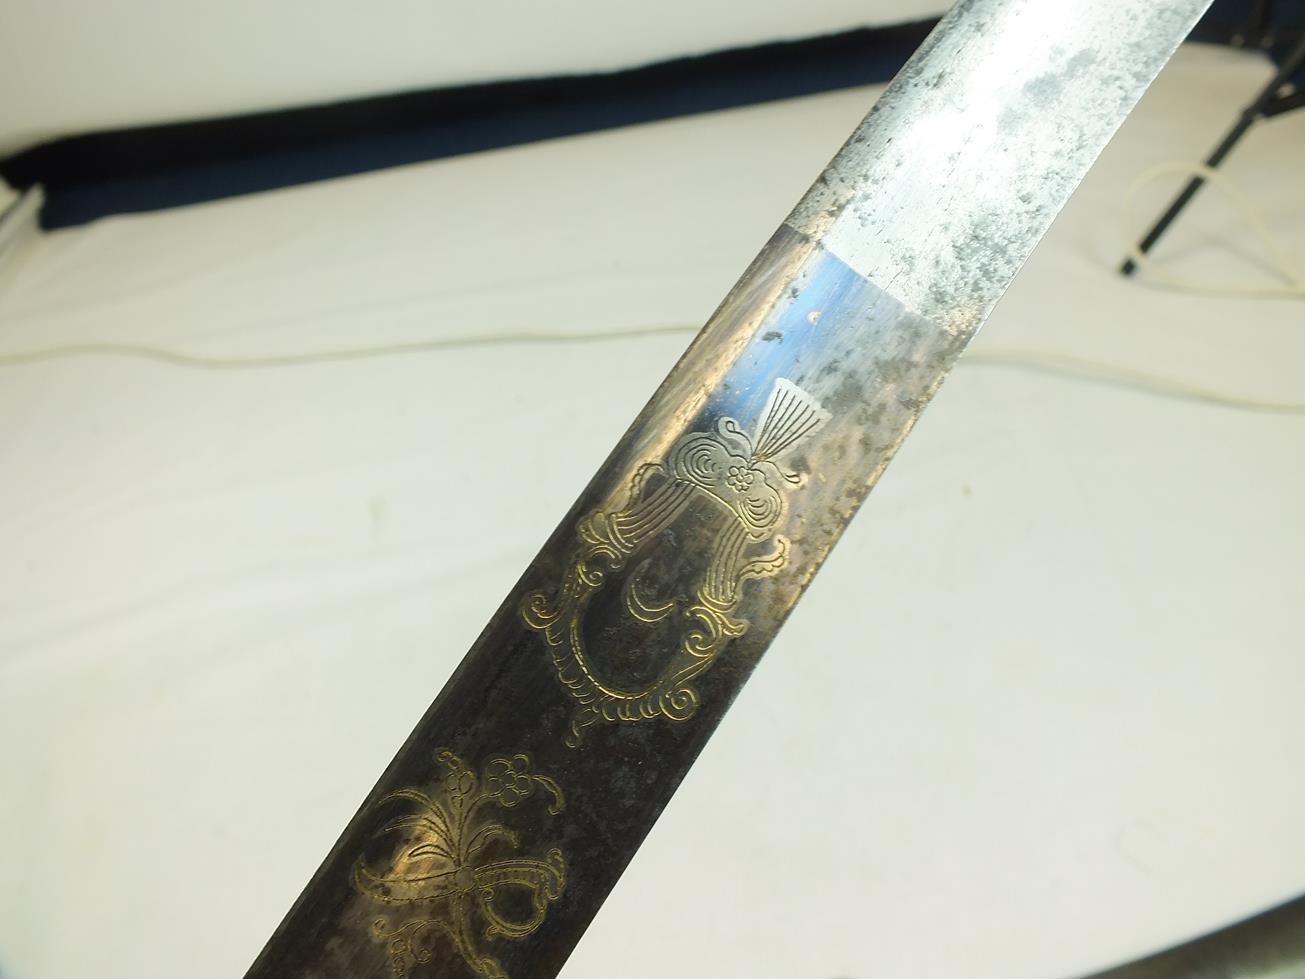 A GEORGIAN CAVALRY SABRE, 82.5cm curved blade decorated with stands of arms, crescent motifs, a - Image 10 of 15